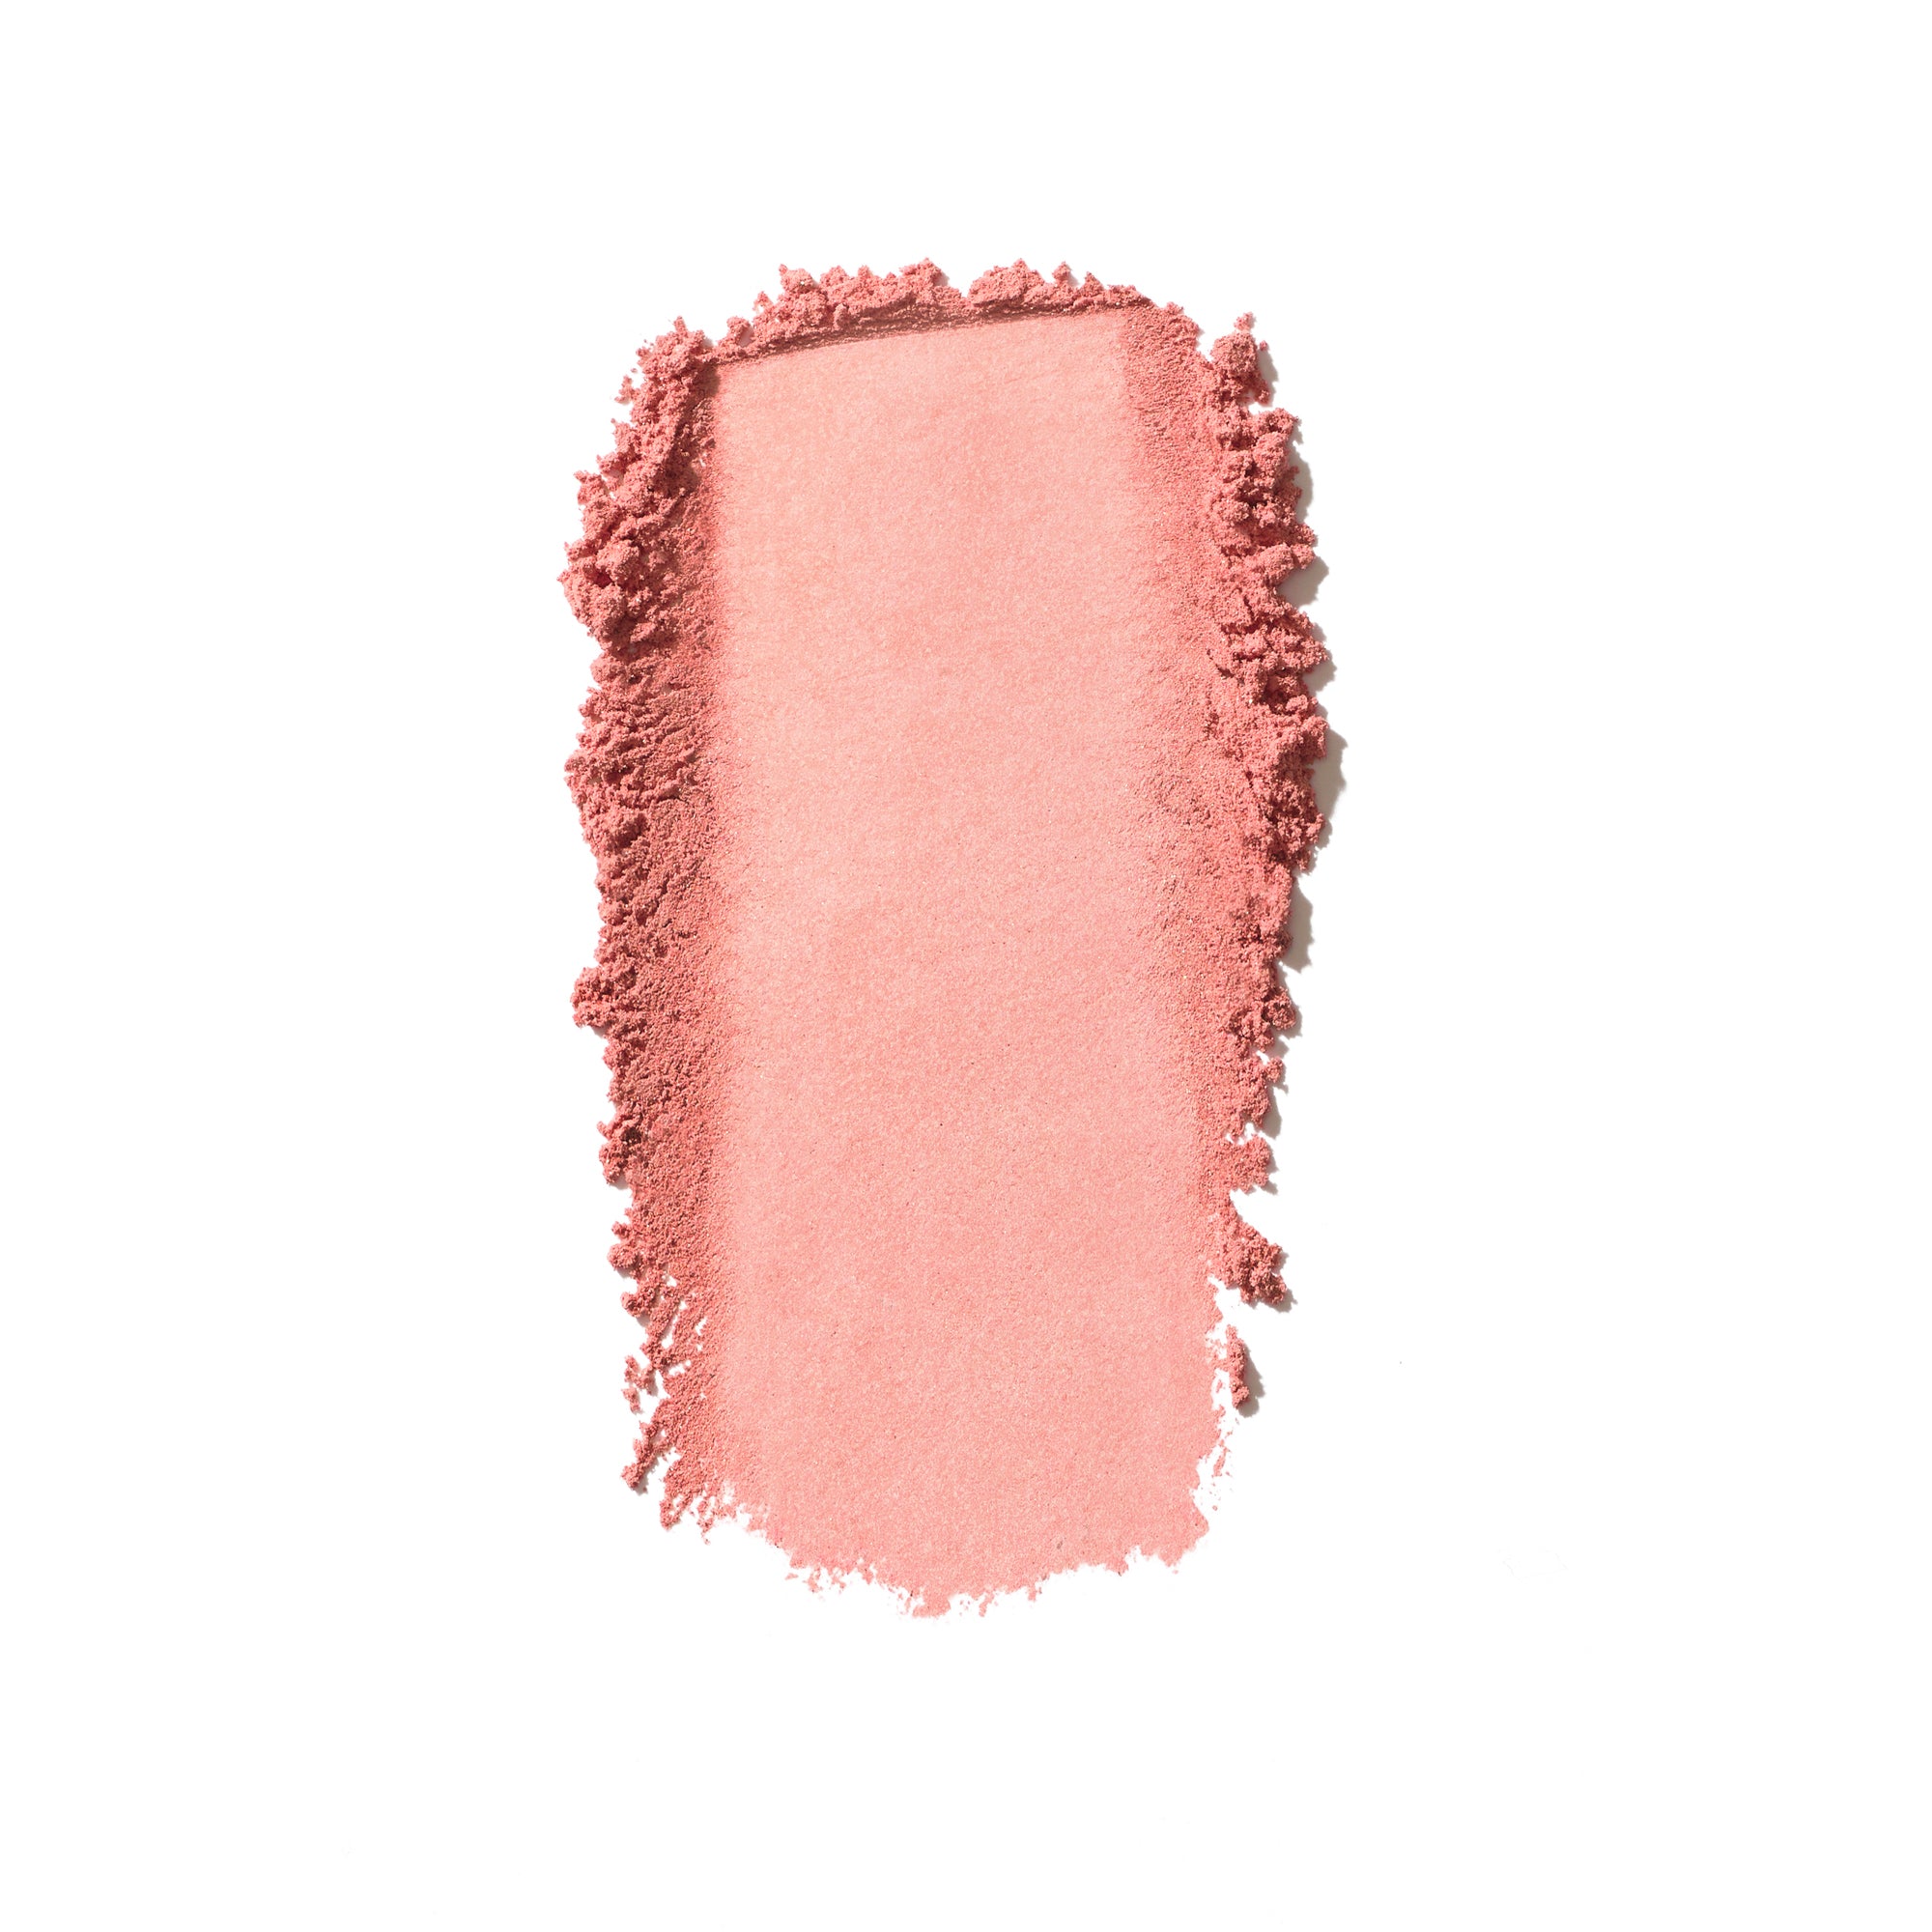 Jane Iredale PurePressed Blush / Clearly Pink / Swatch